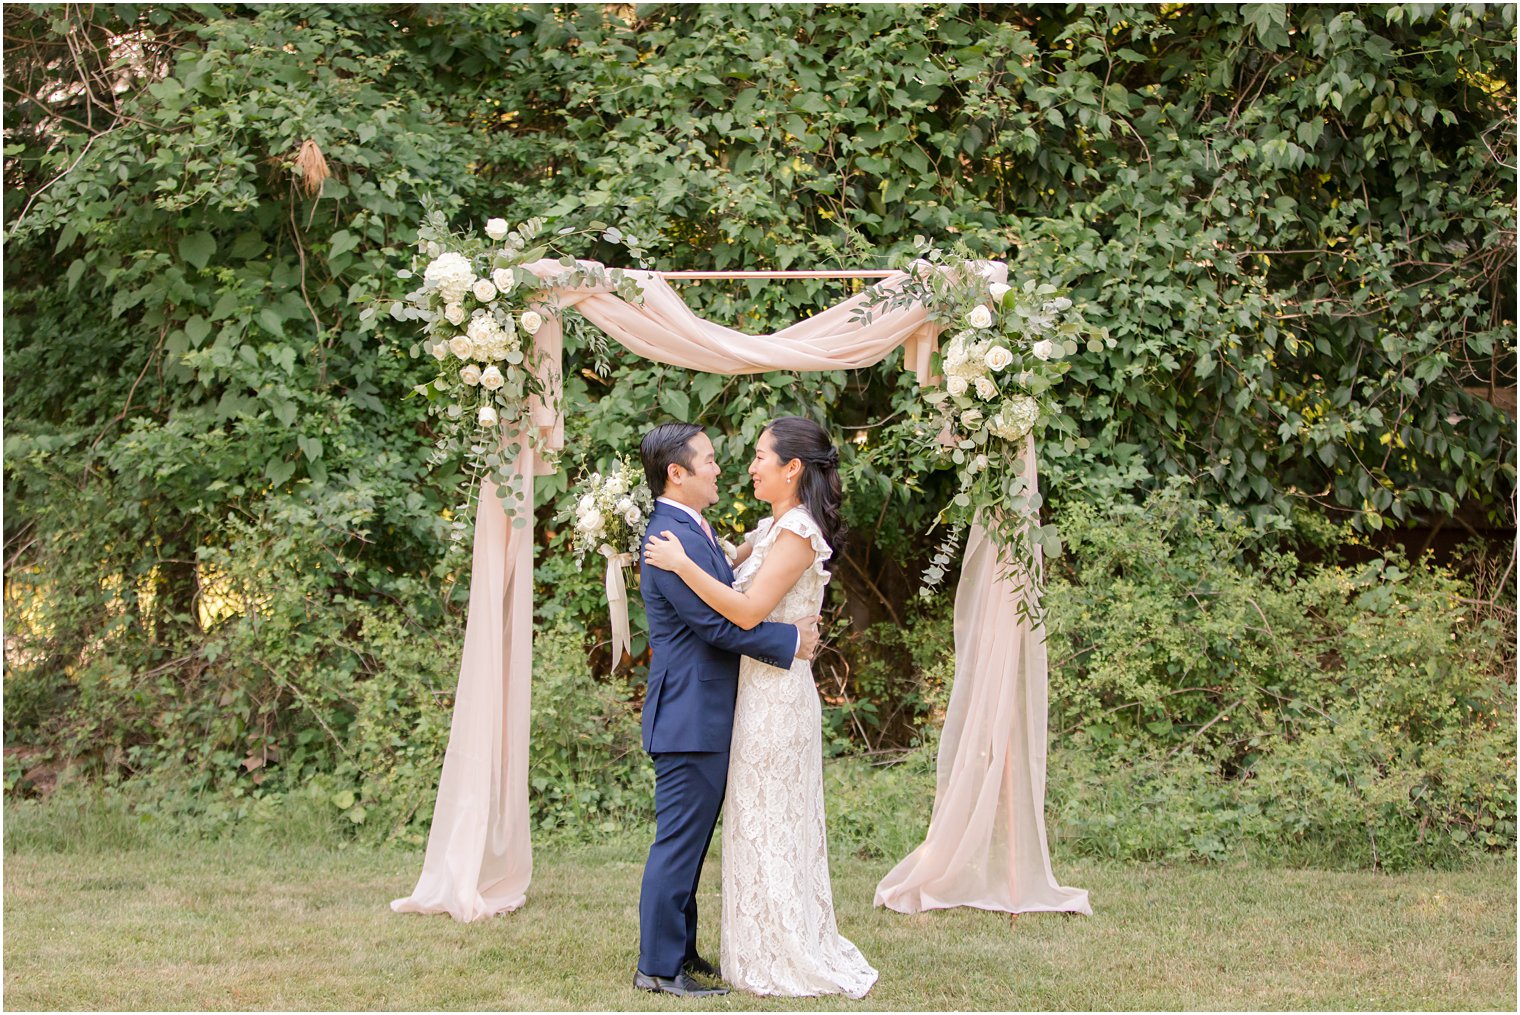 Bride and groom | NJ Intimate Wedding with a Gorgeous Arch by Idalia Photography